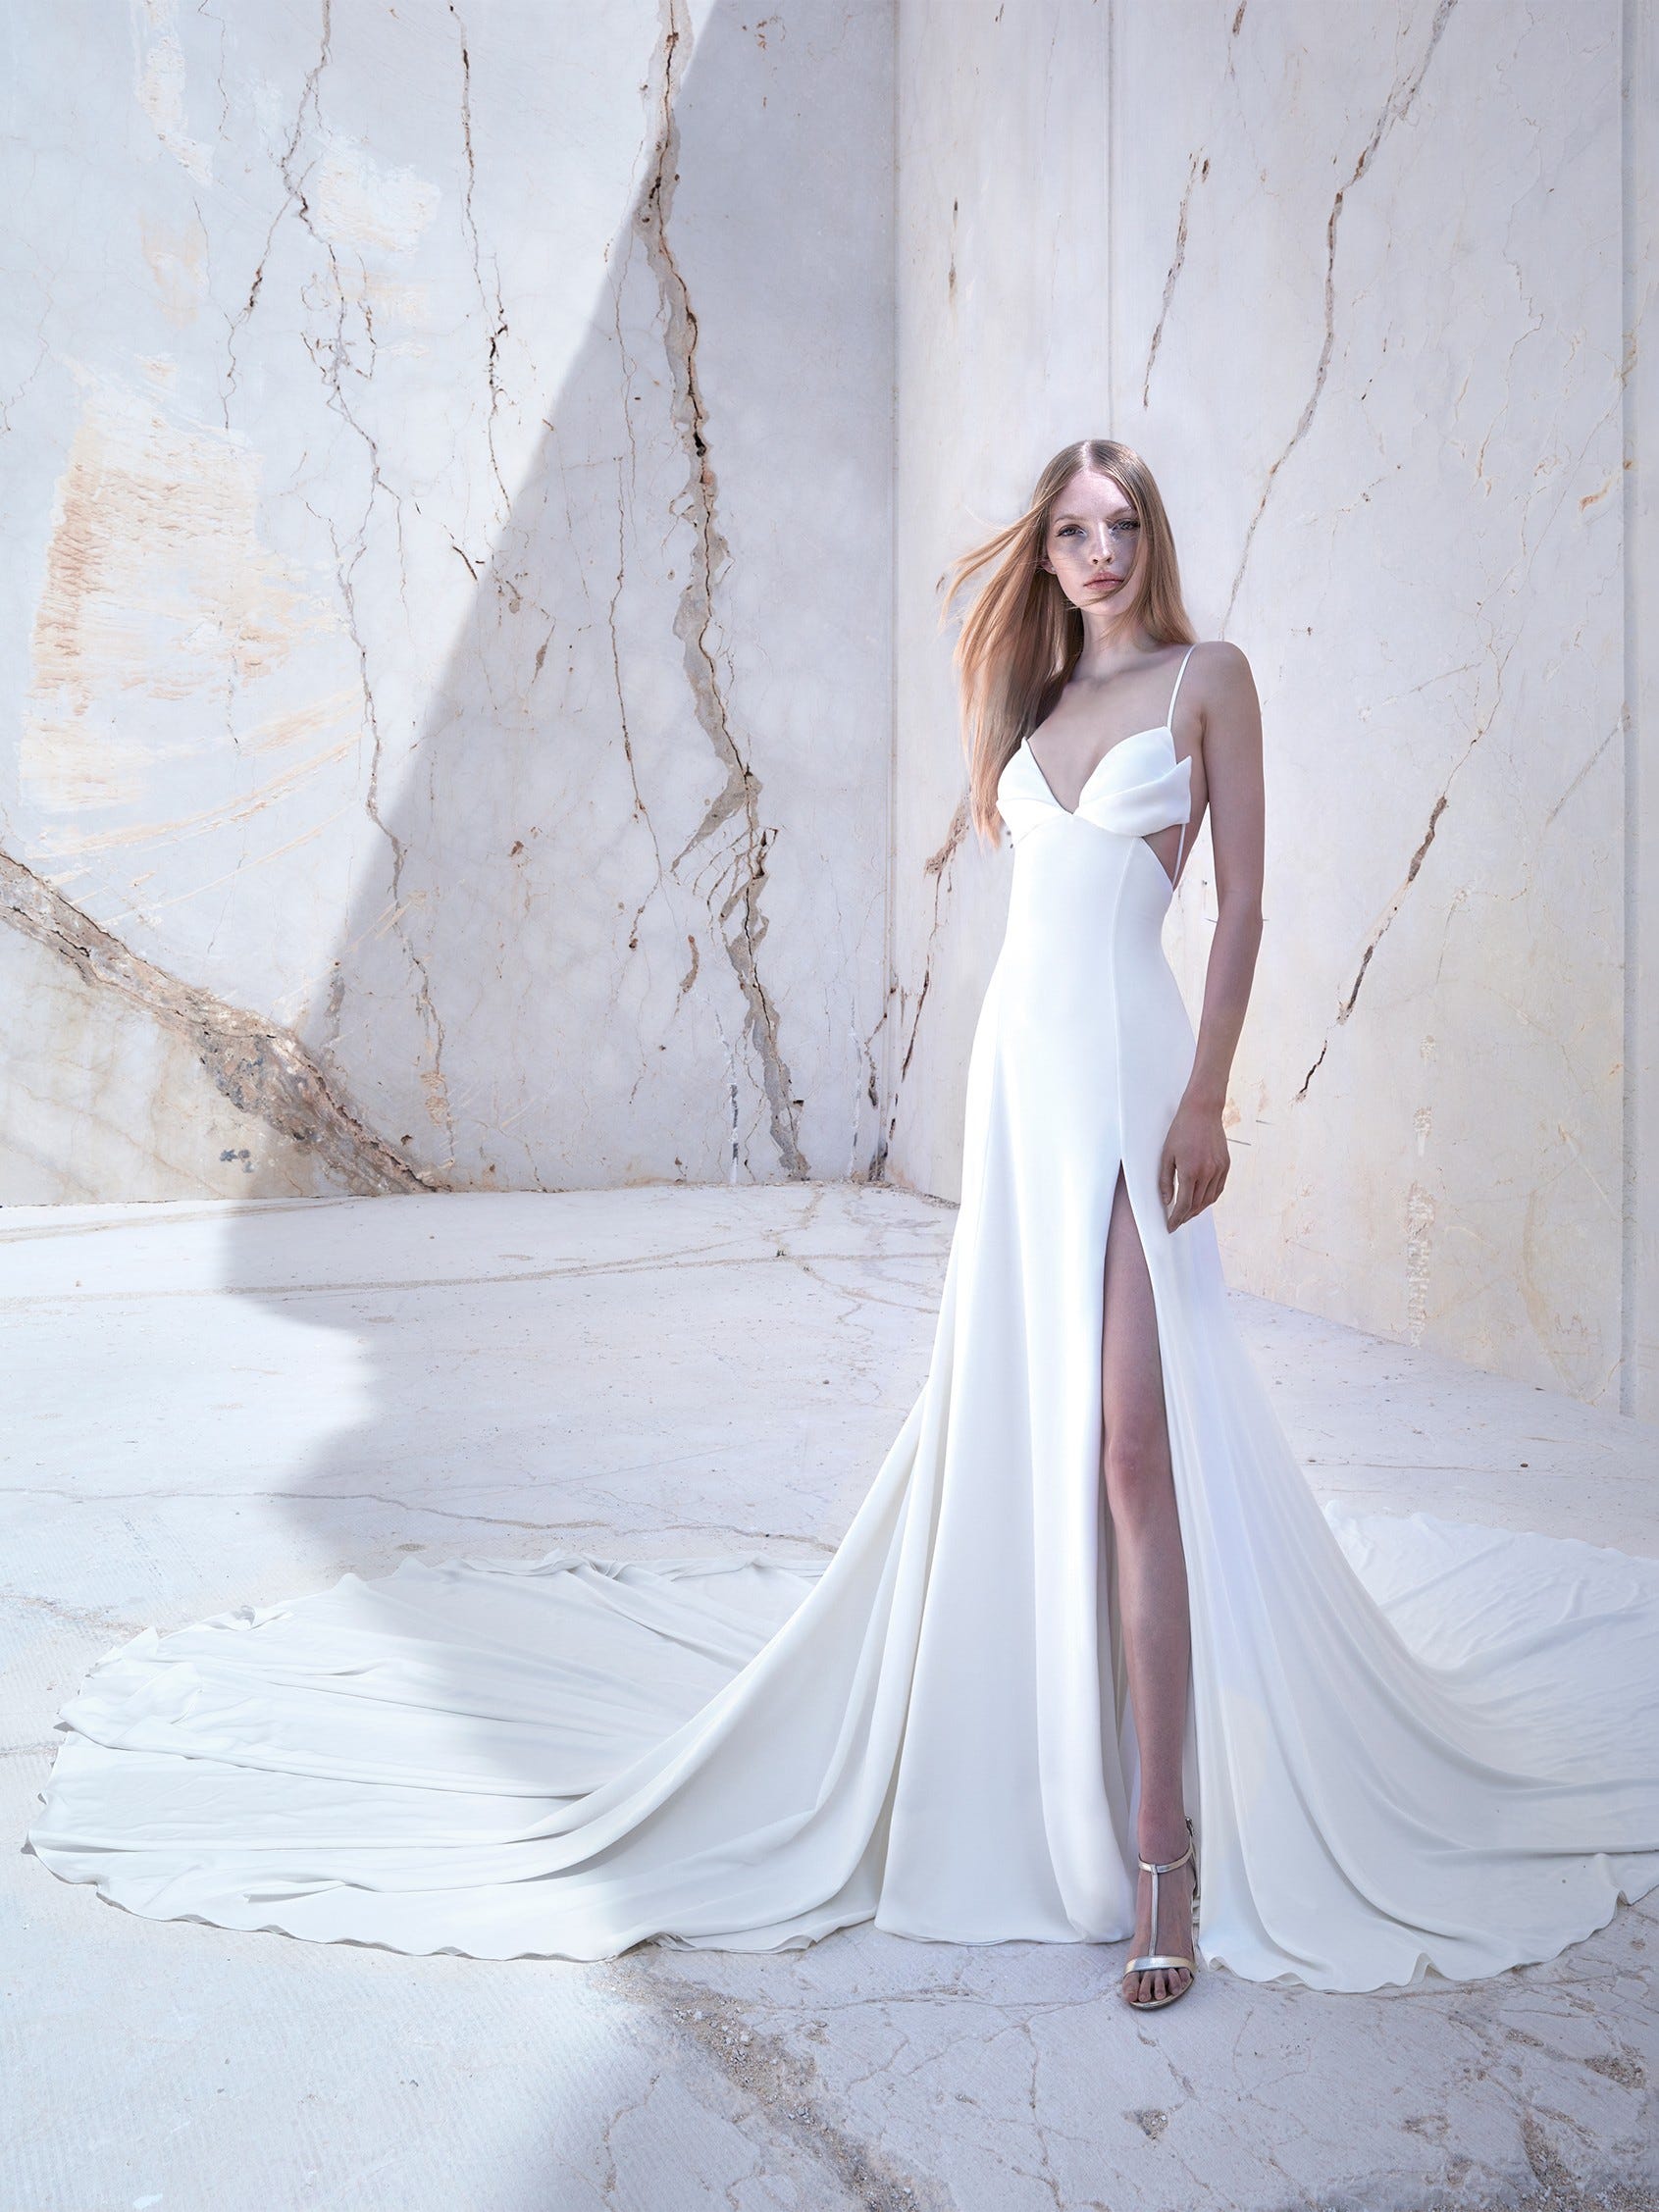 The Atelier Couture - Stylish Wedding, Bridal Dress, & Gowns